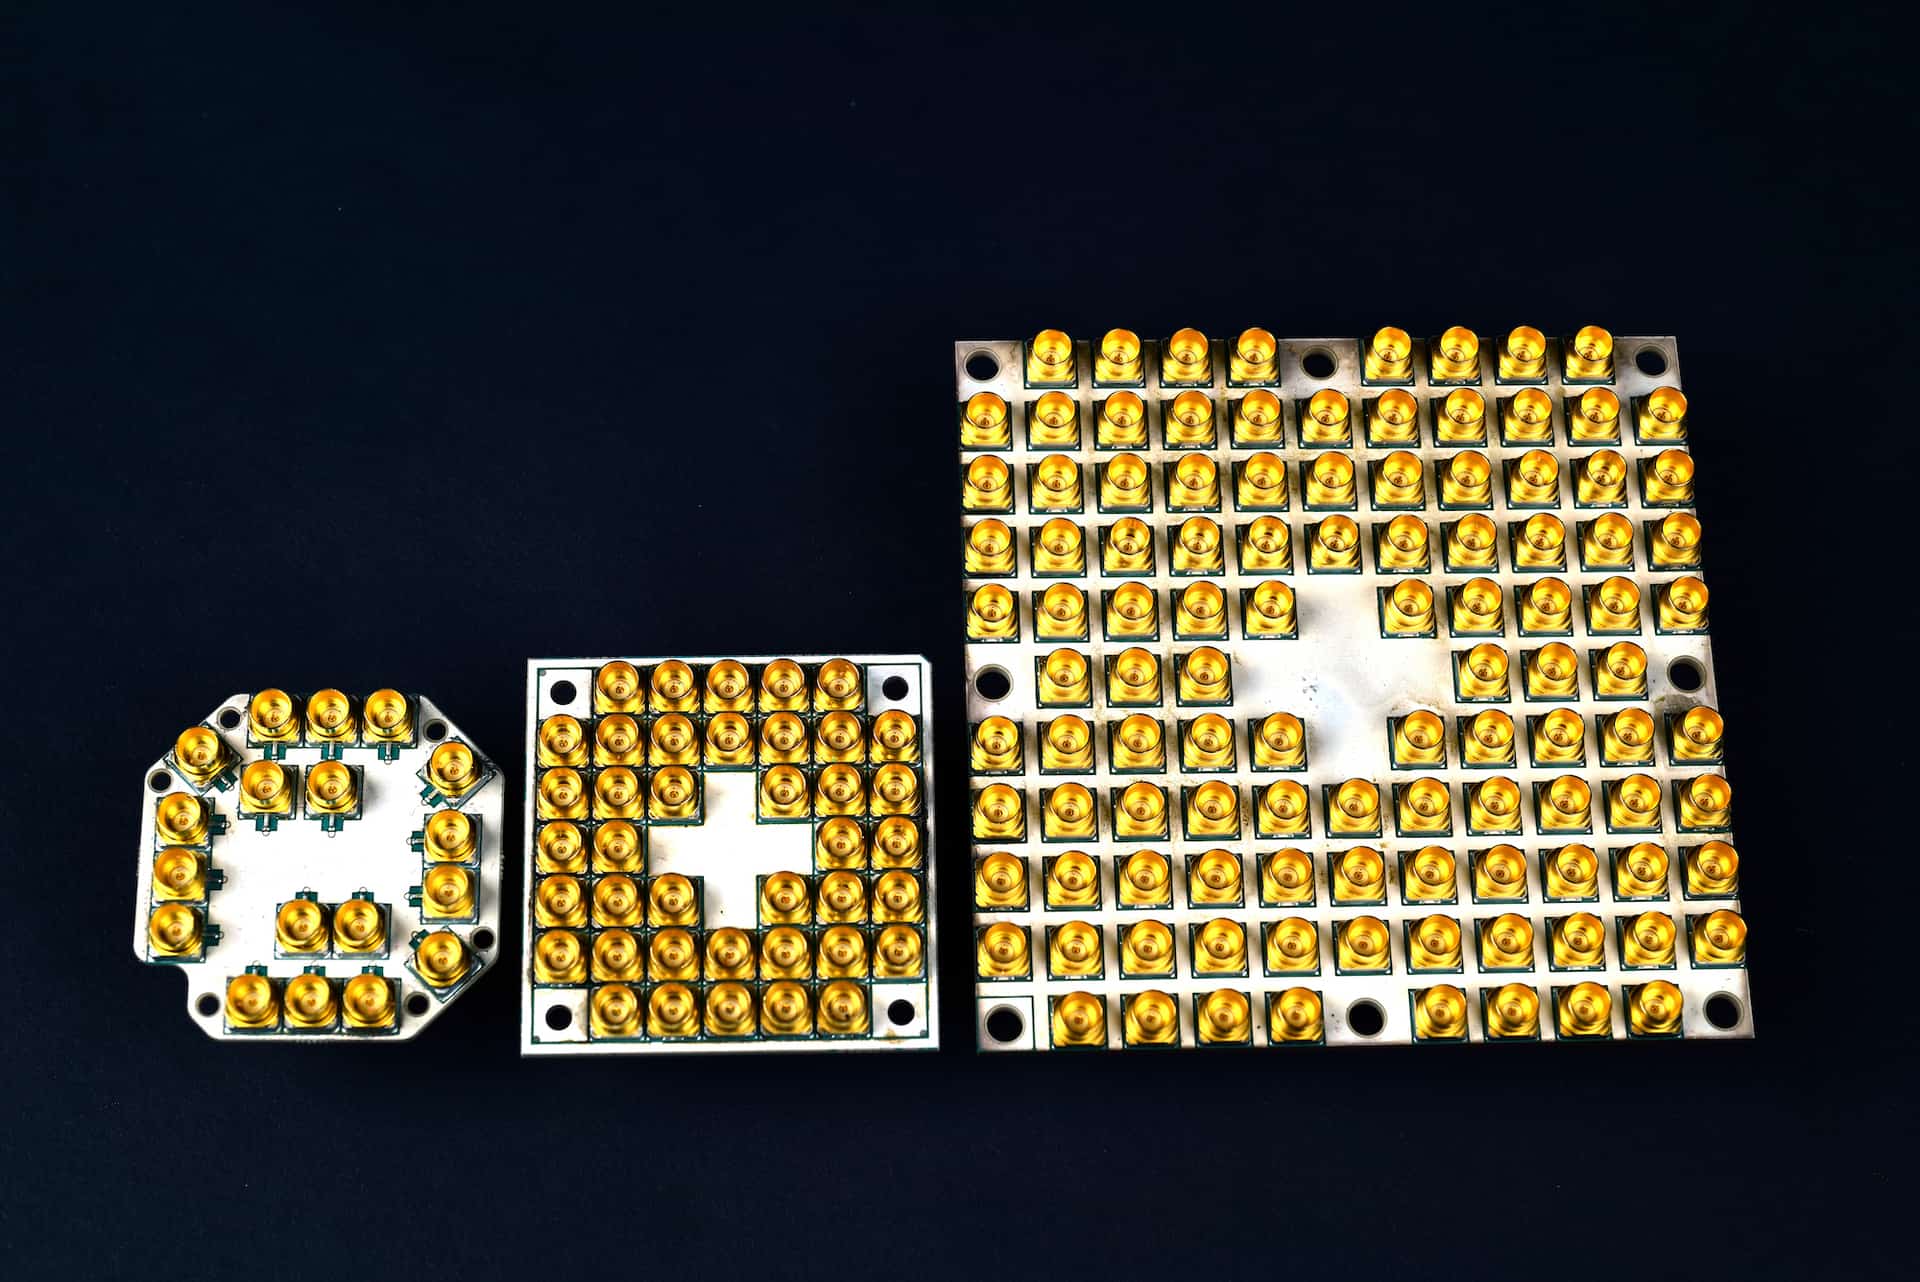 Intel Corporation is making fast progress scaling superconducting quantum computing test chips to higher qubit counts -- from 7, to 17 and now 49 qubits (left to right). Multiple gold connectors are required to control and operate each qubit. (Credit: Walden Kirsch/Intel Corporation